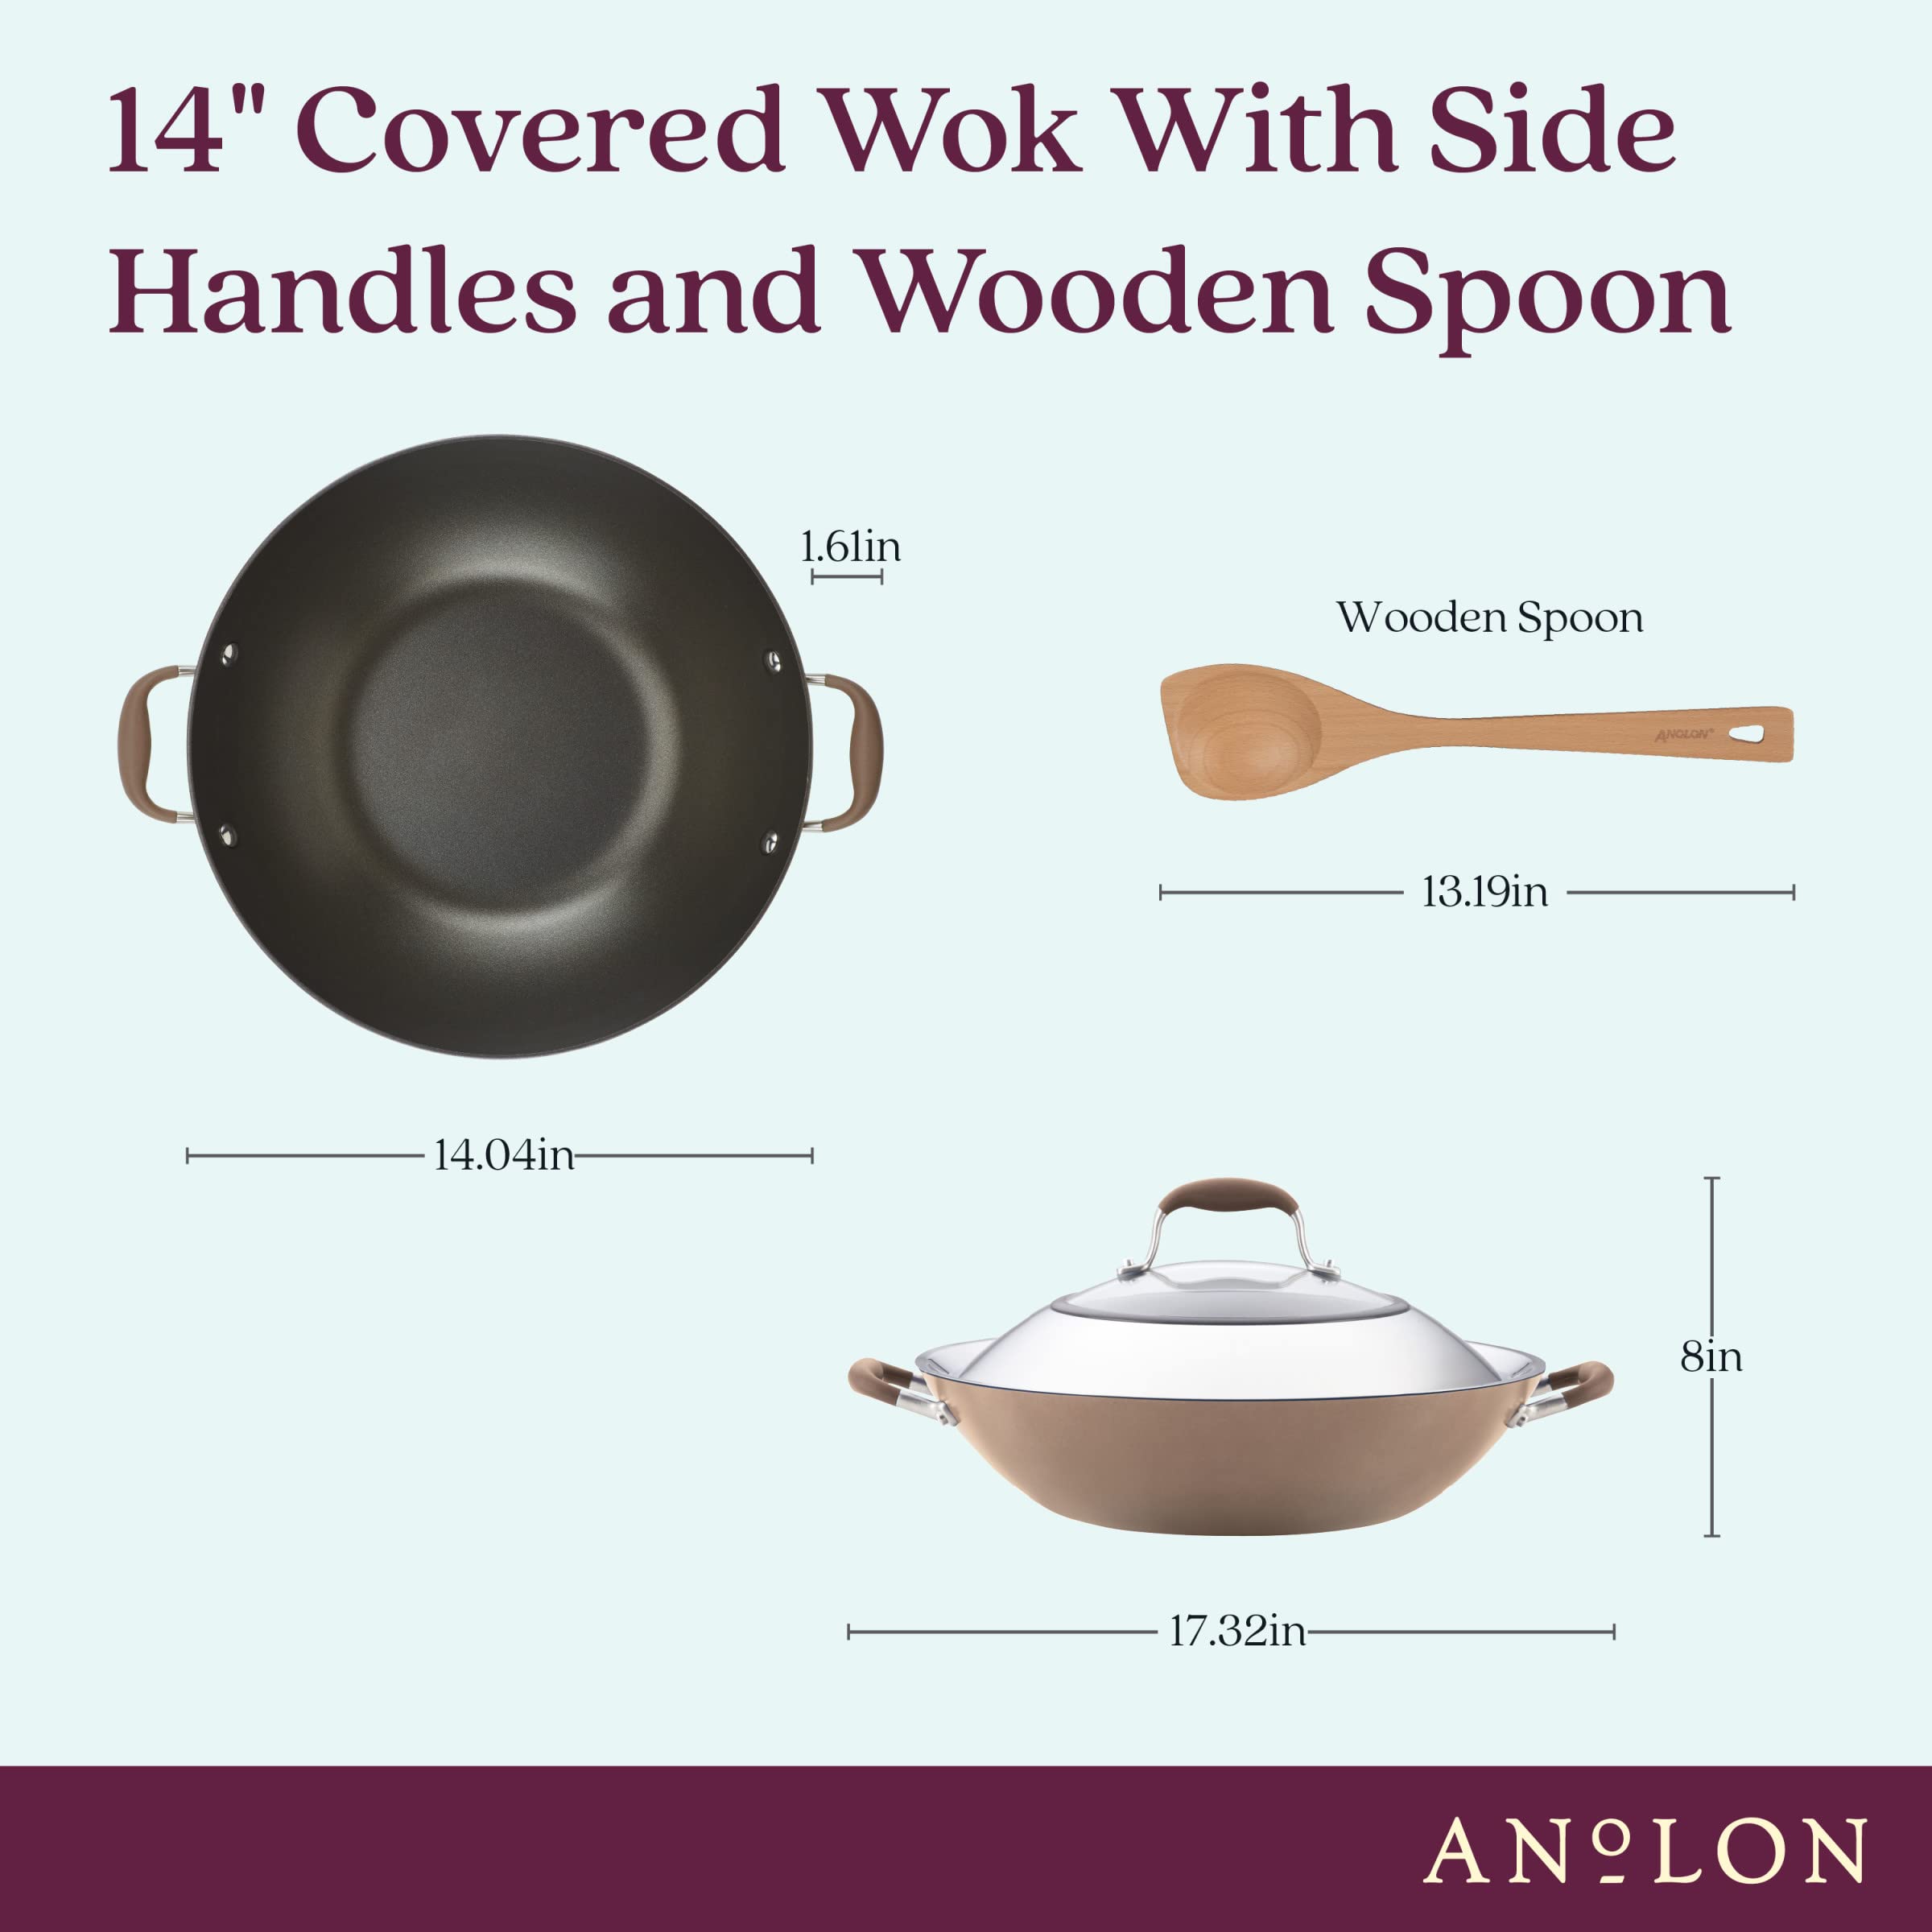 Anolon Advanced Home Hard Anodized Nonstick Wok/Stir Fry with Lid and Cooking Tool, 14 Inch, Bronze